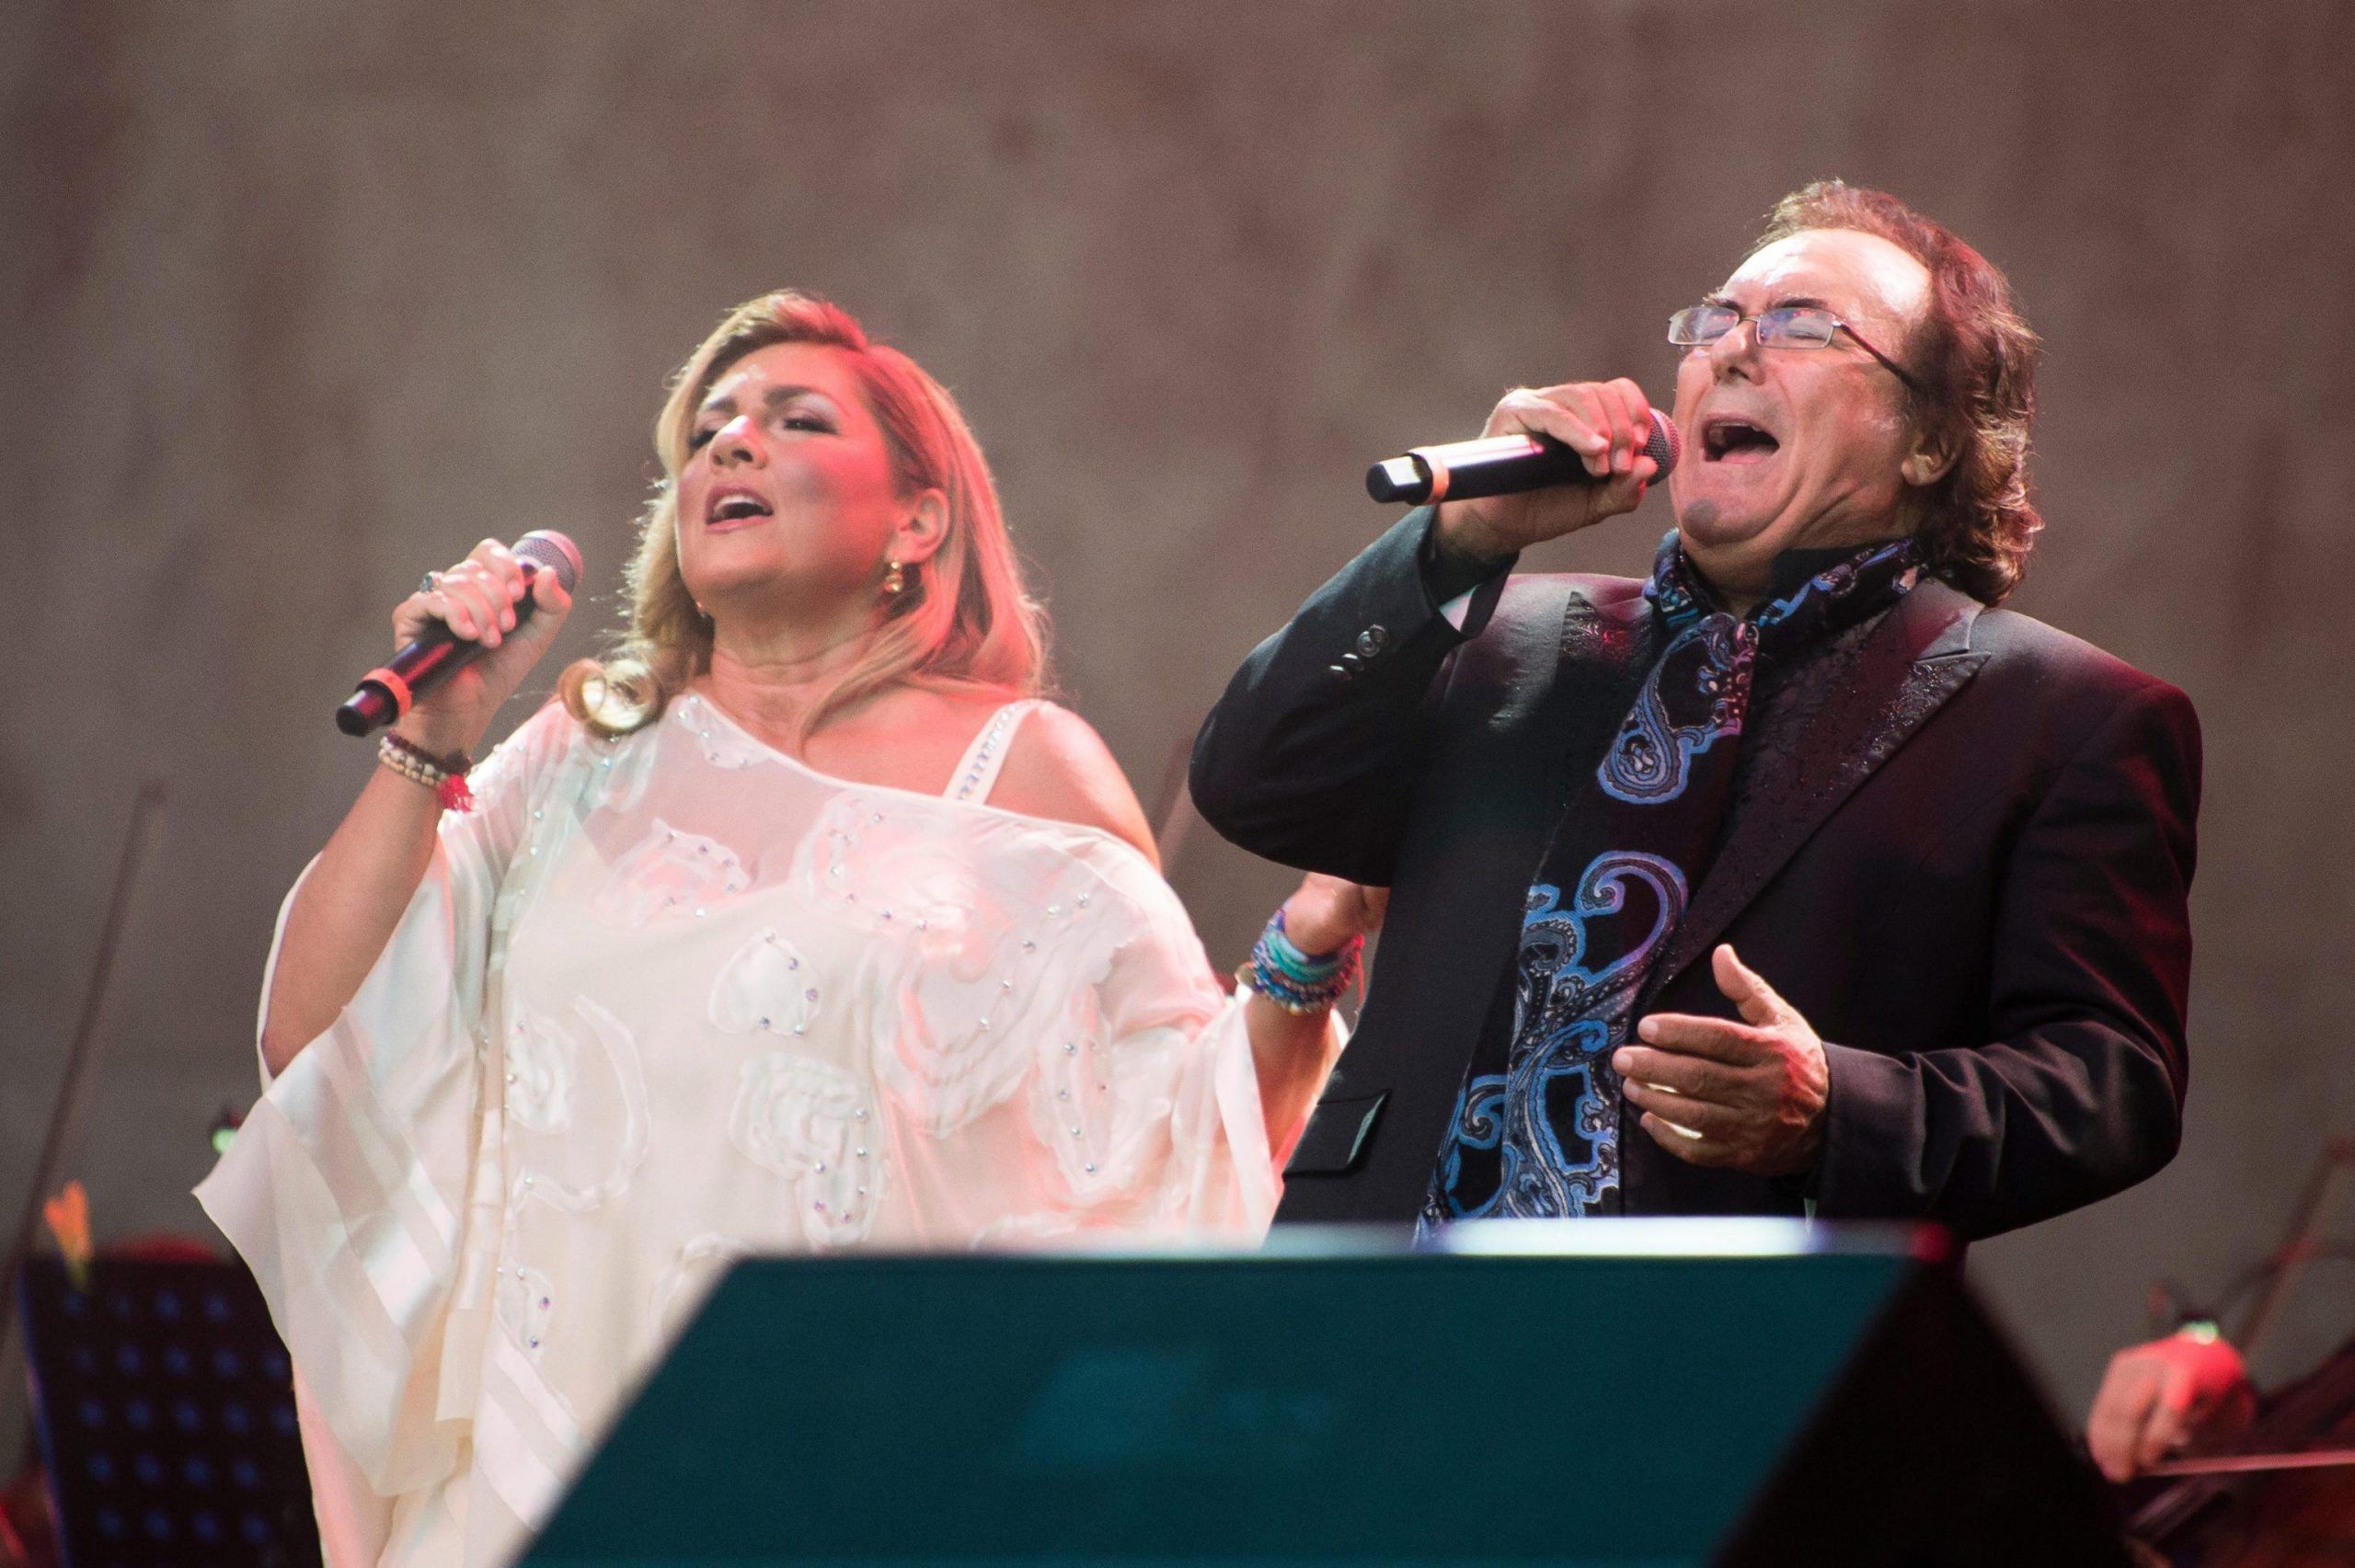 Germany Come back of Albano and Romina Power